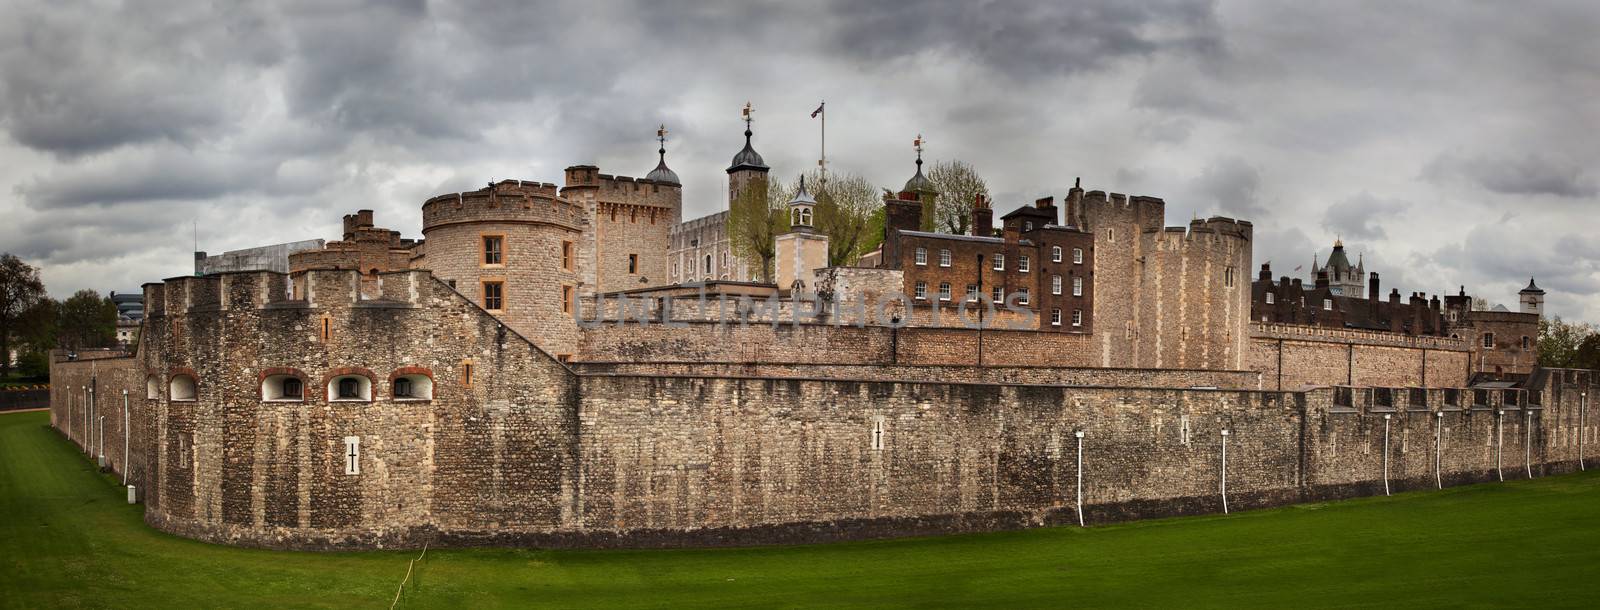 The Tower of London, England, the UK. The historic Royal Palace and Fortress